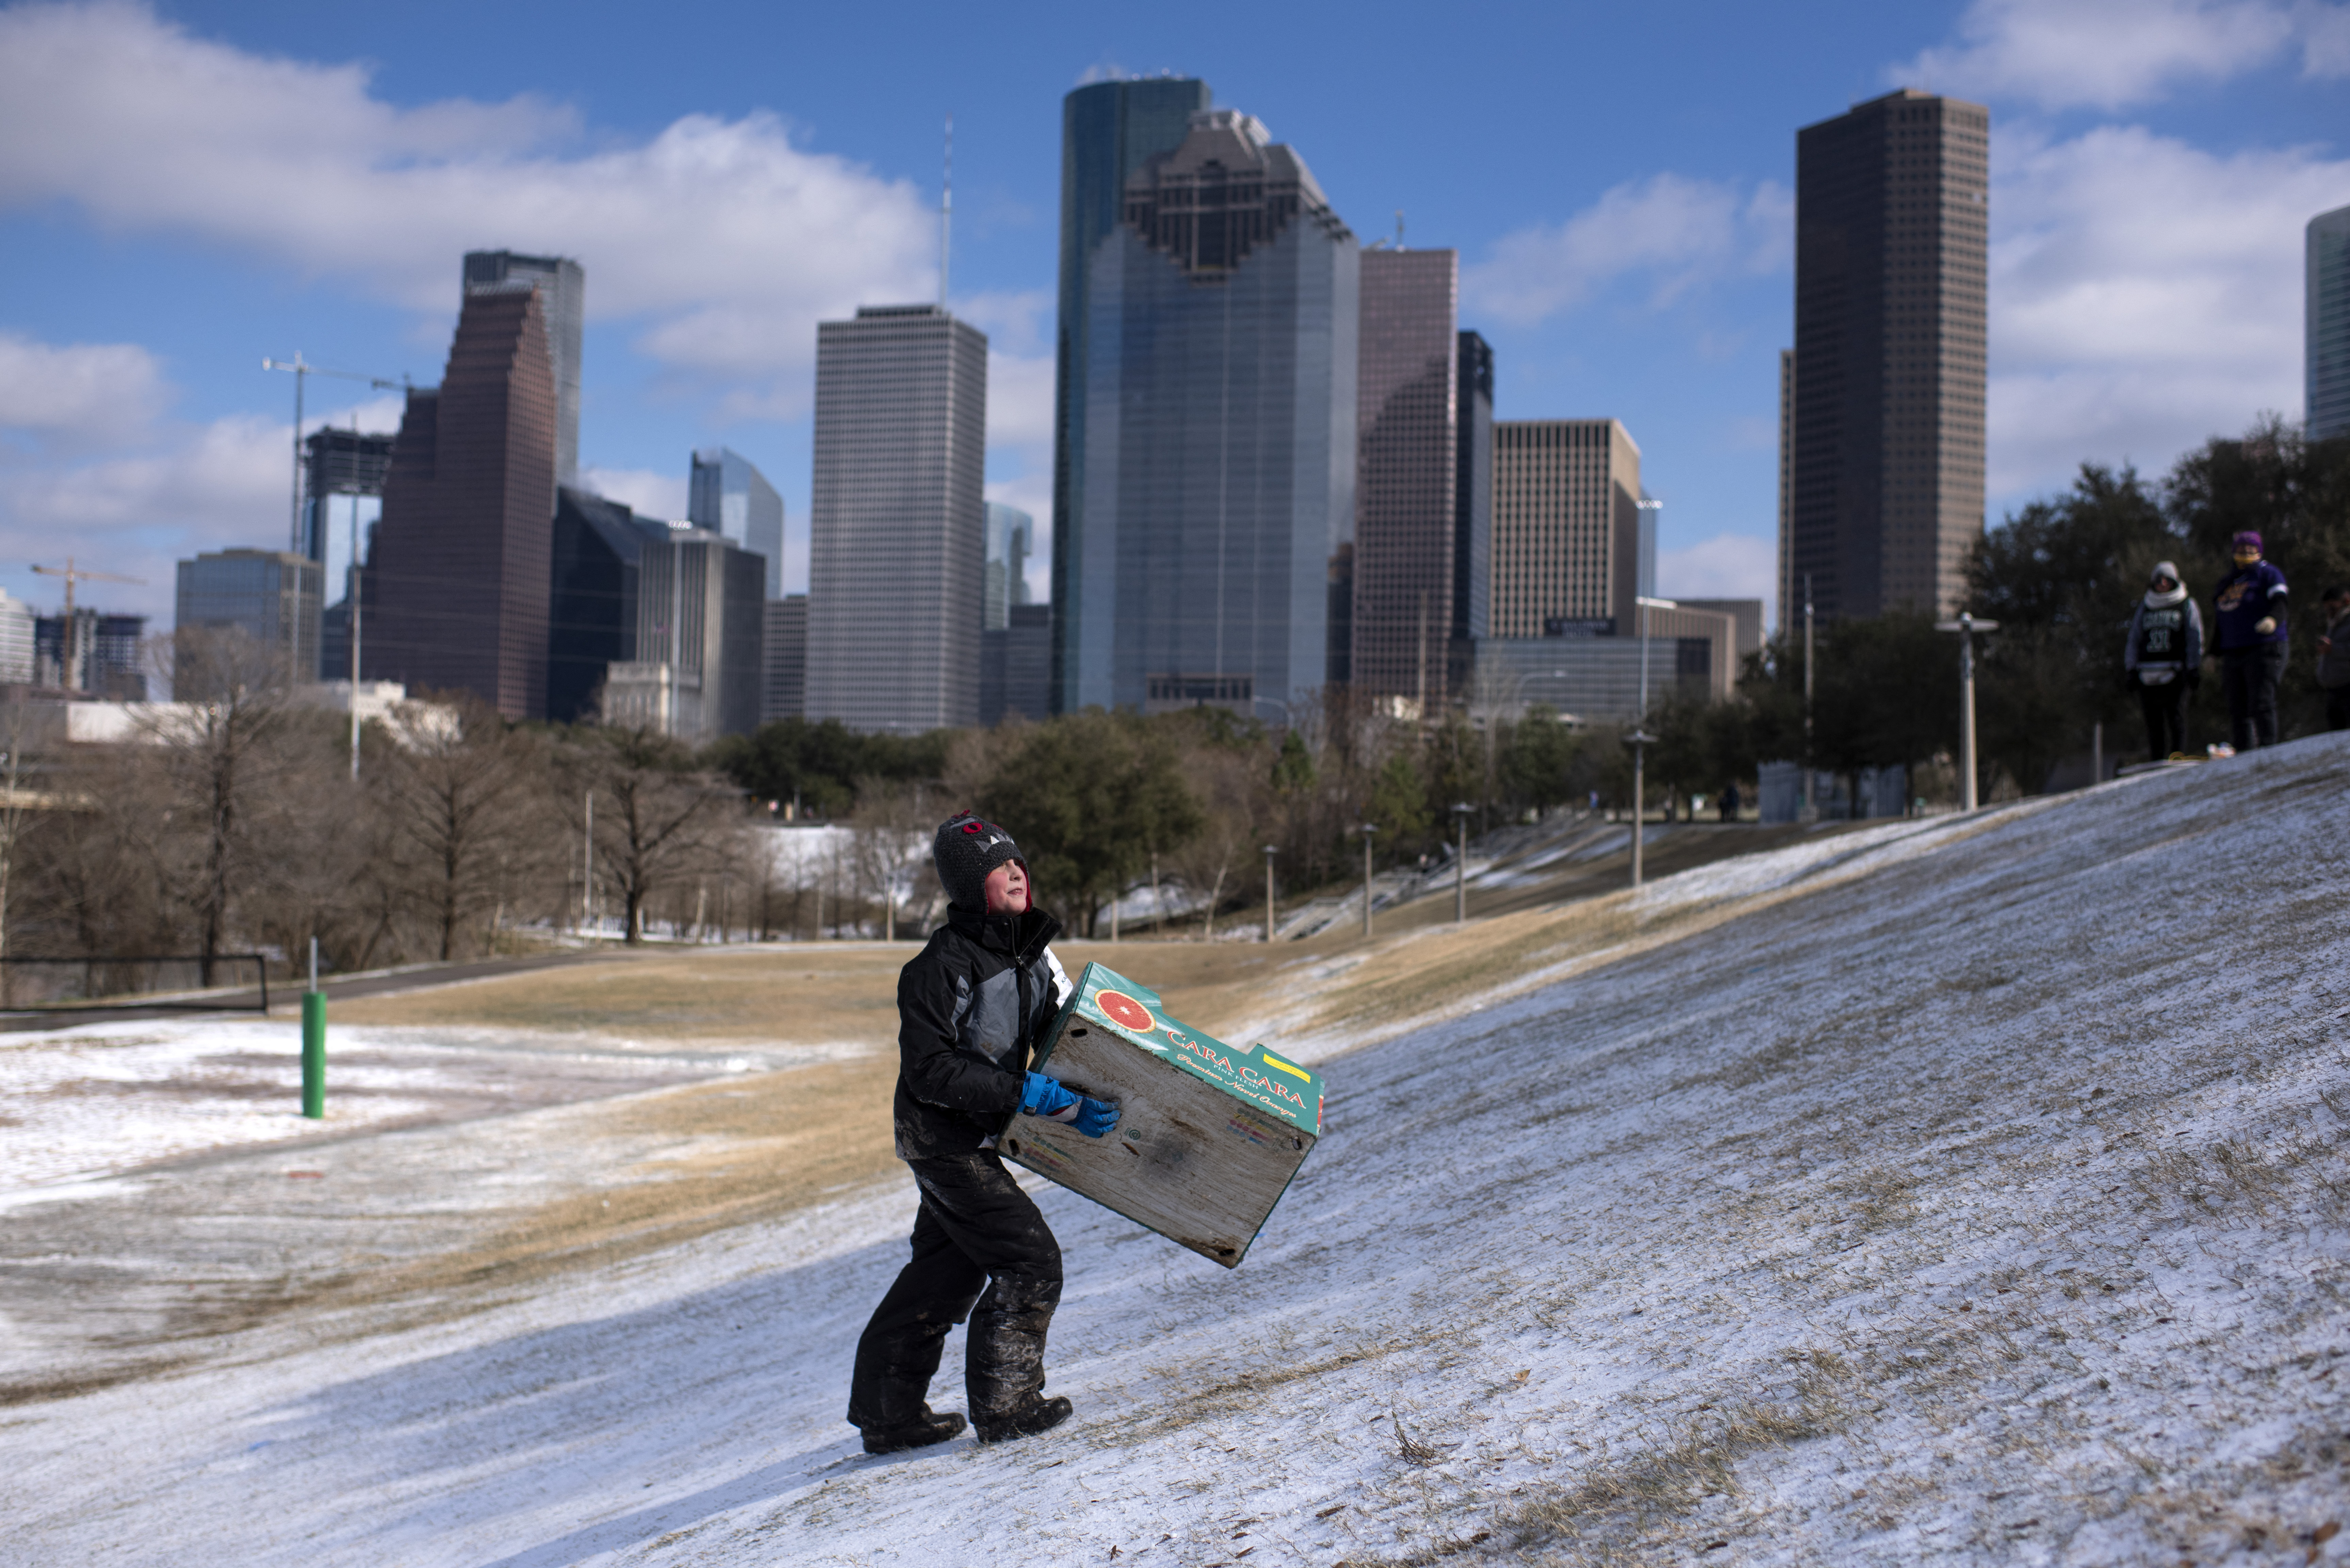 Two dead in Texas amid subfreezing cold snap